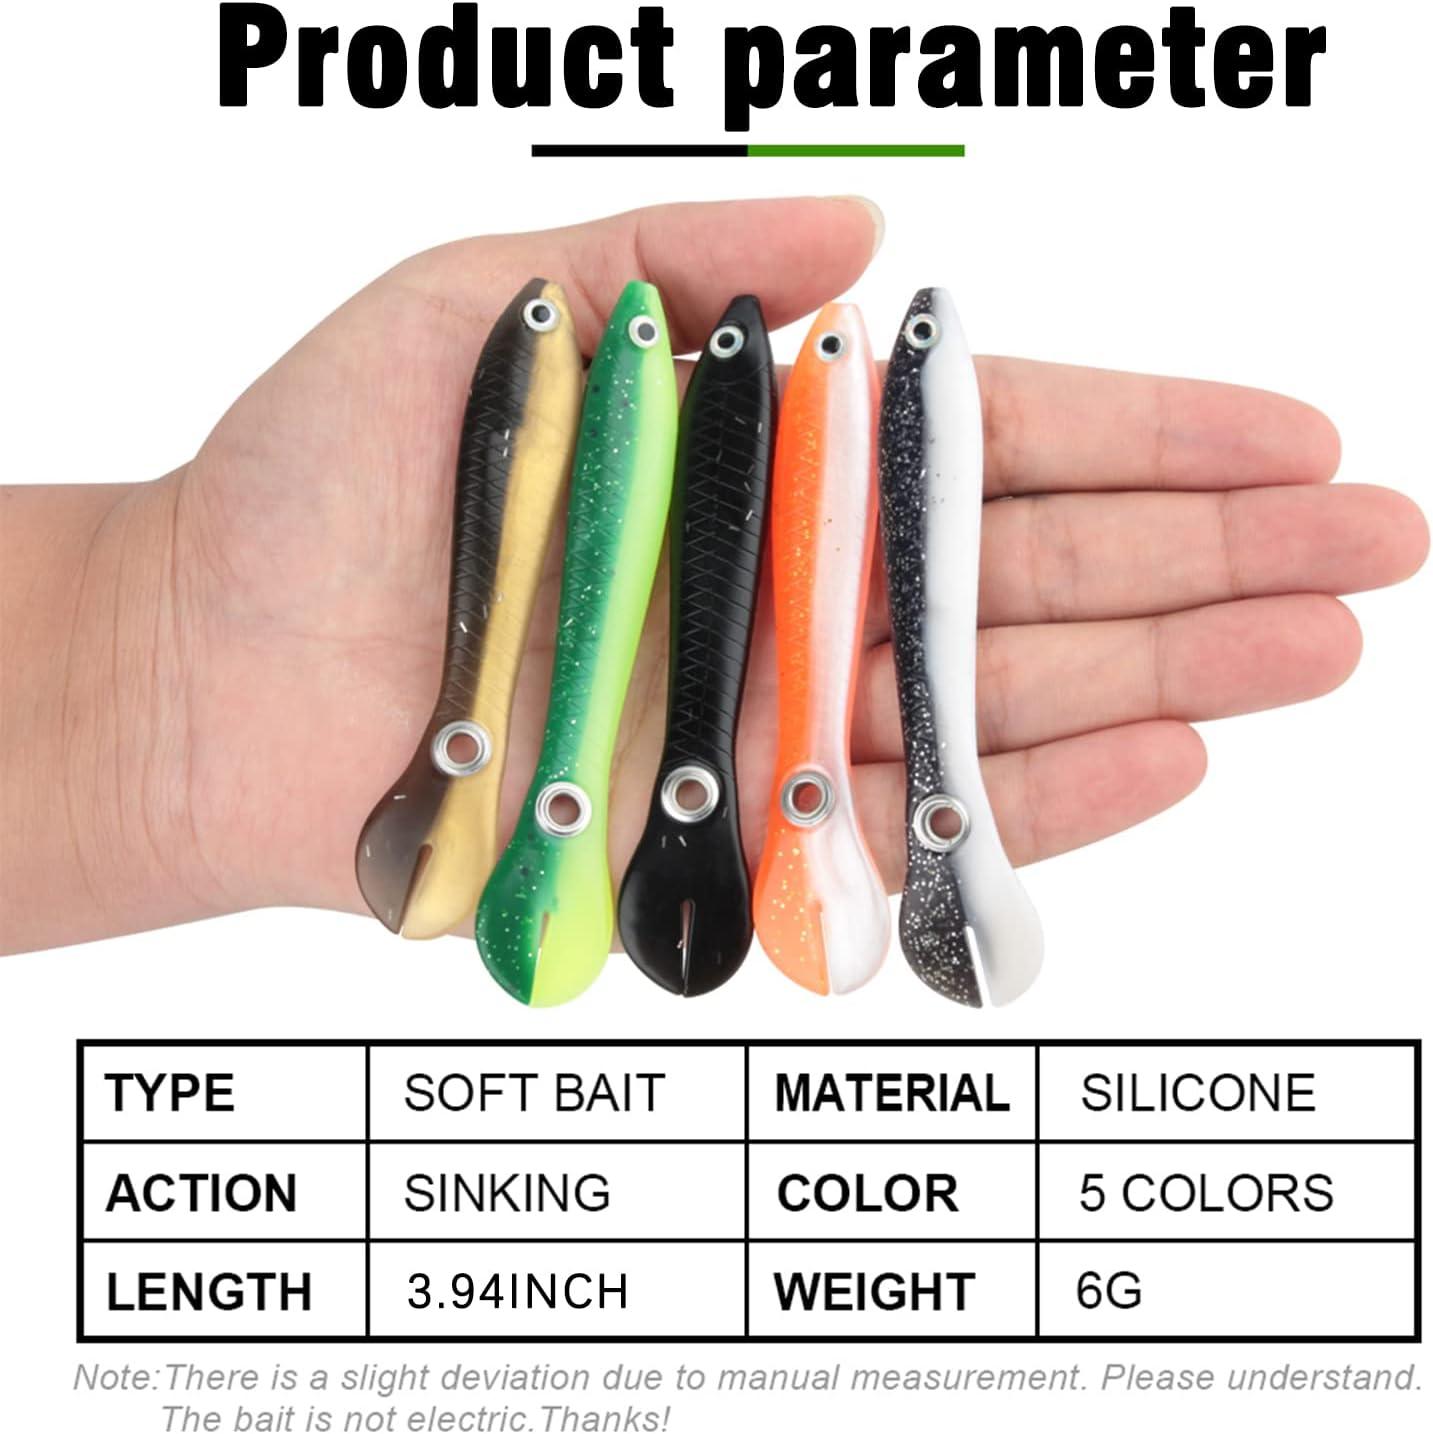 Soft Bionic Fishing Lure,Bionic Fishing Lure for Saltwater & Freshwater,  Creative Realistic Finshing Lure Fishing Accessory,Mock Lure Can  Bounce,Suitable for Fishing Lovers Outdoor 10pcs